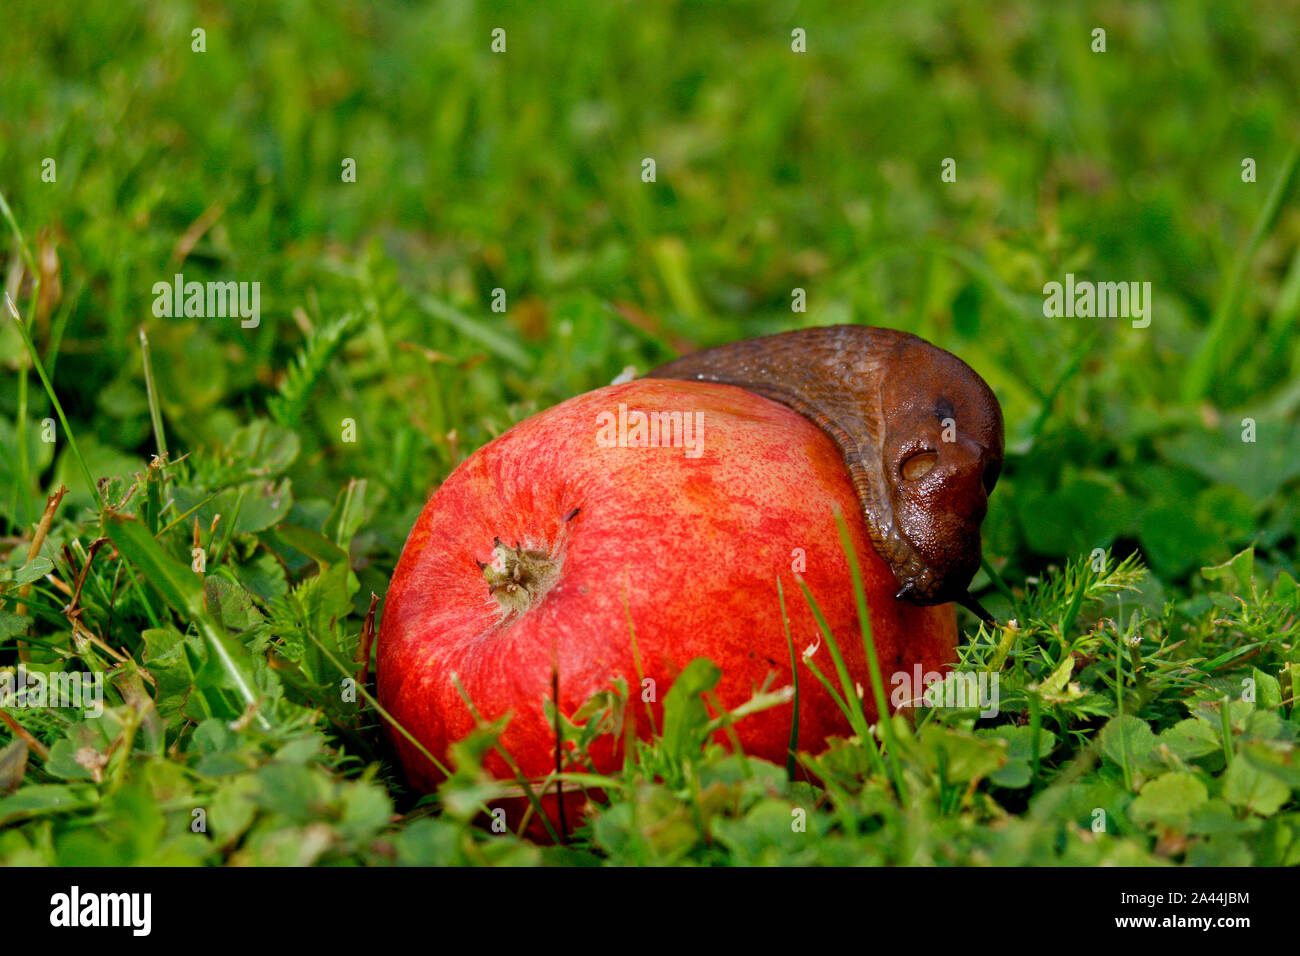 slug crawling on a red apple on green meadow, copy space Stock Photo